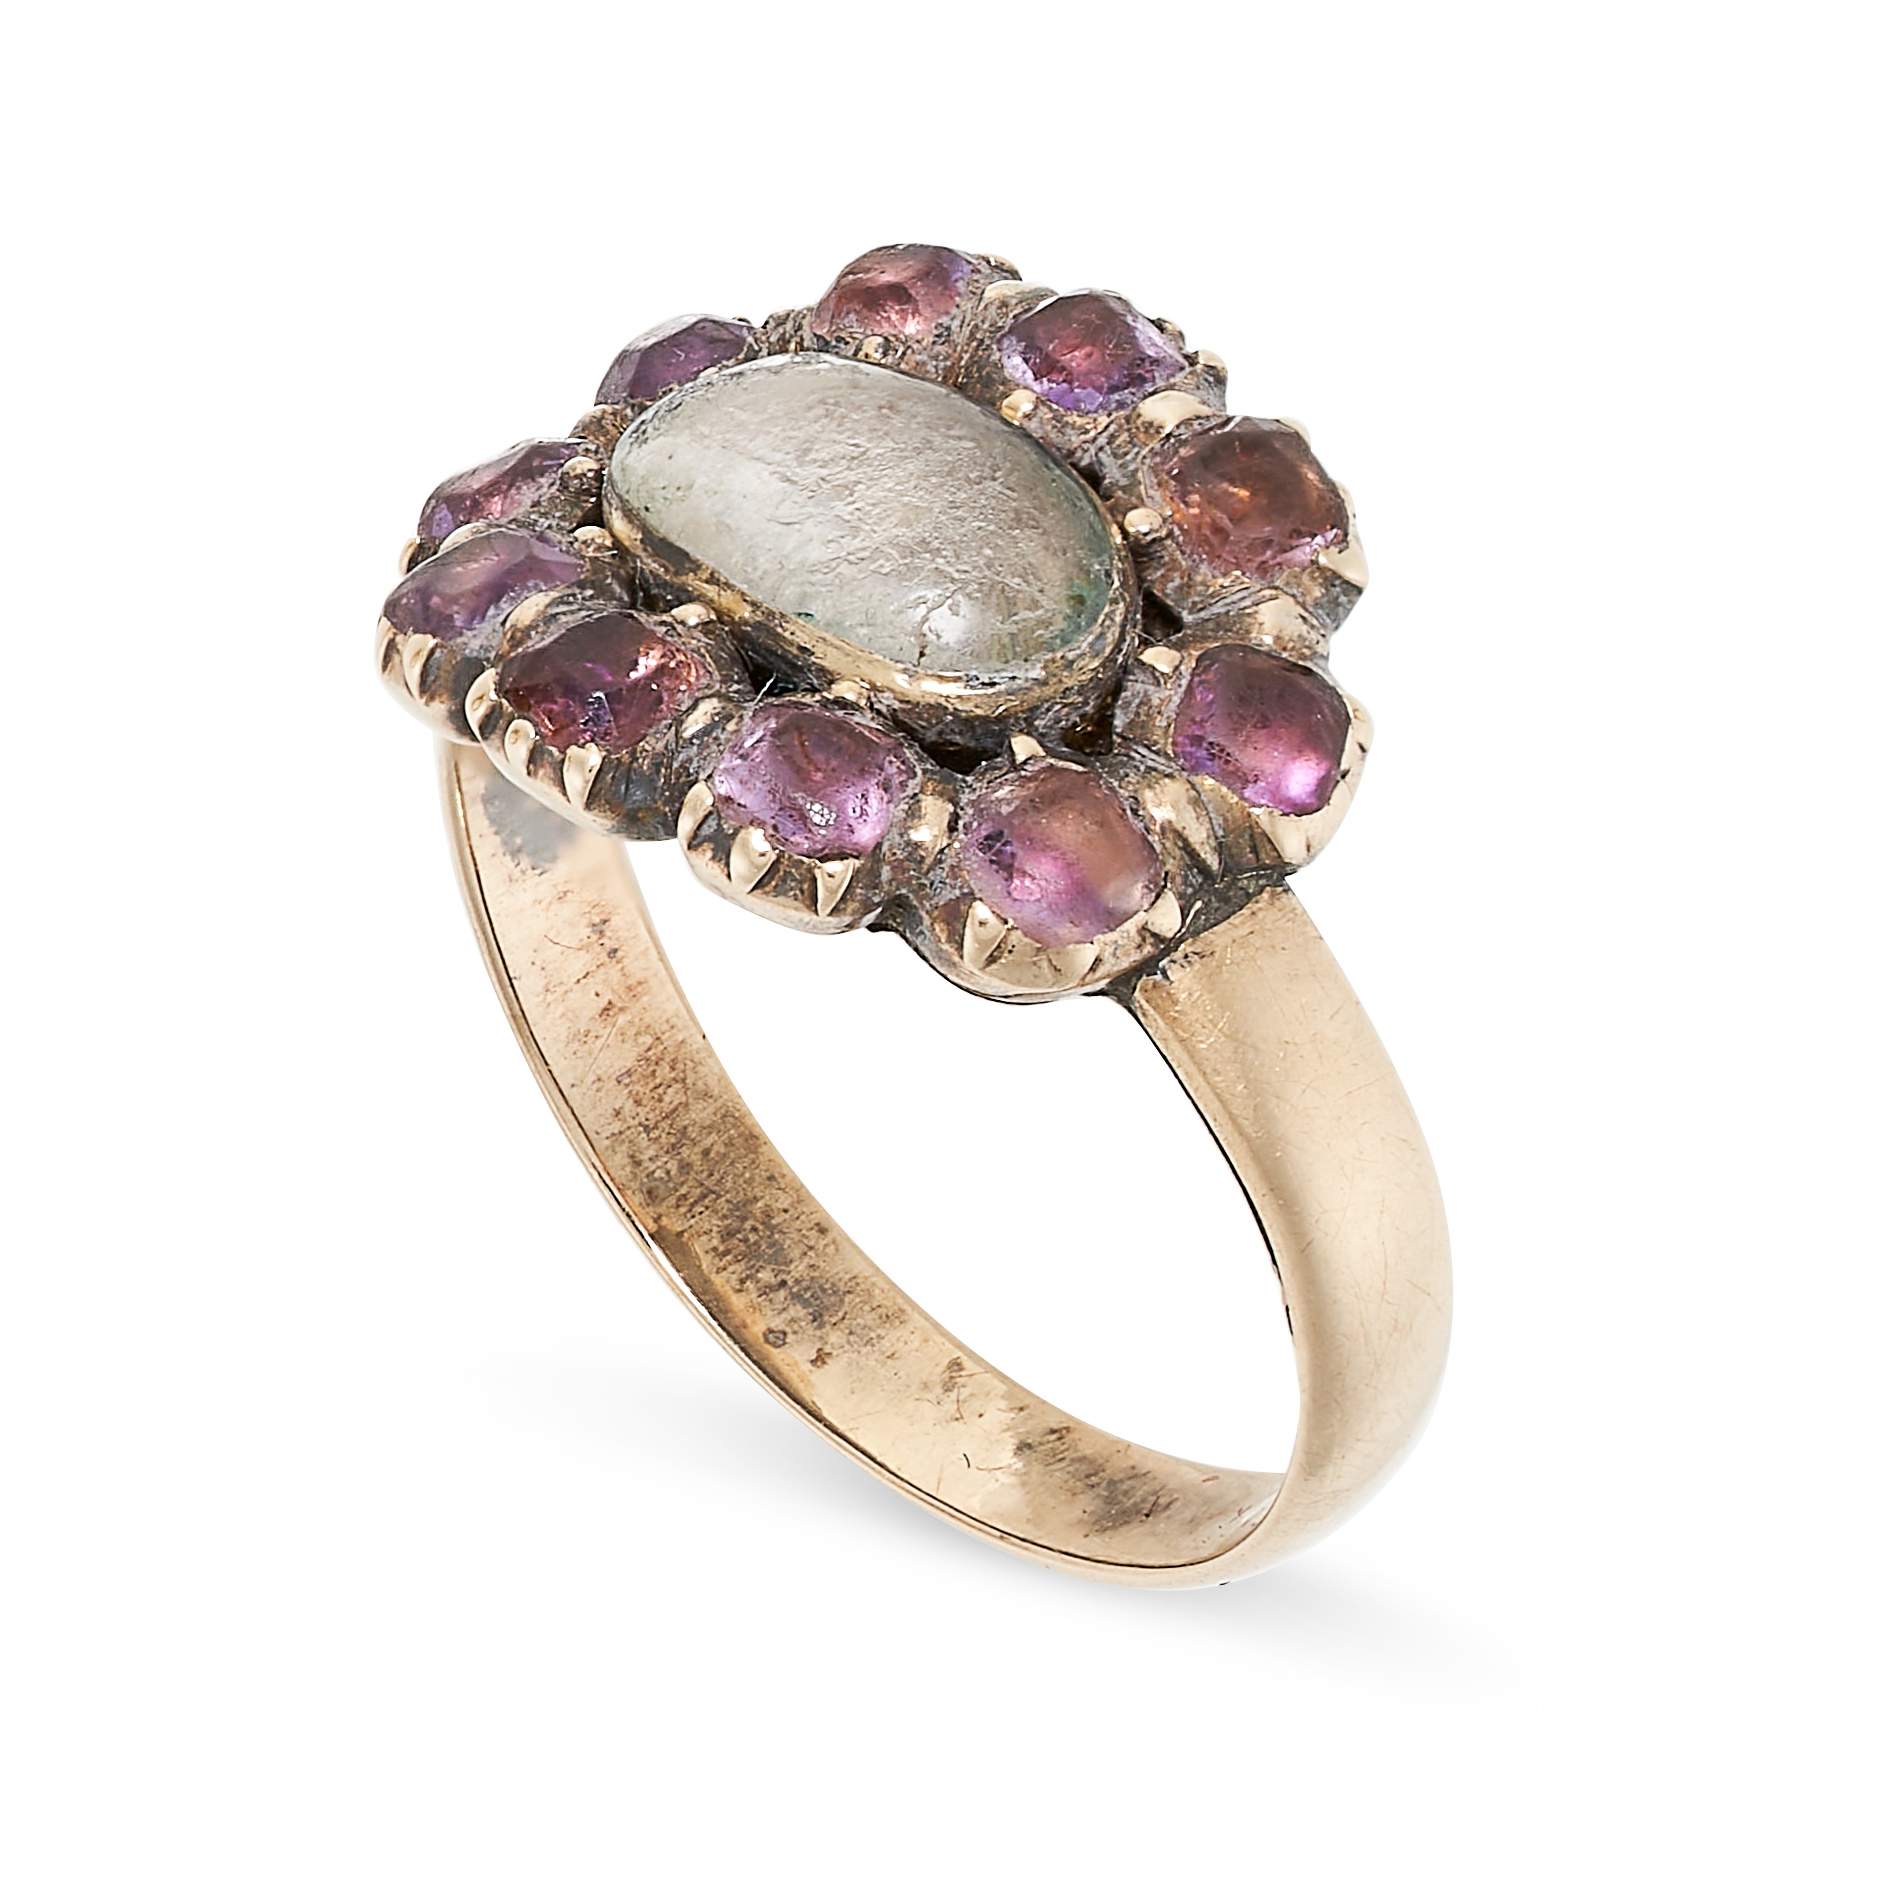 NO RESERVE - AN ANTIQUE GEORGEIAN AMETHYST MOURNING LOCKET CLUSTER RING, 19TH CENTURY in yellow - Image 2 of 3